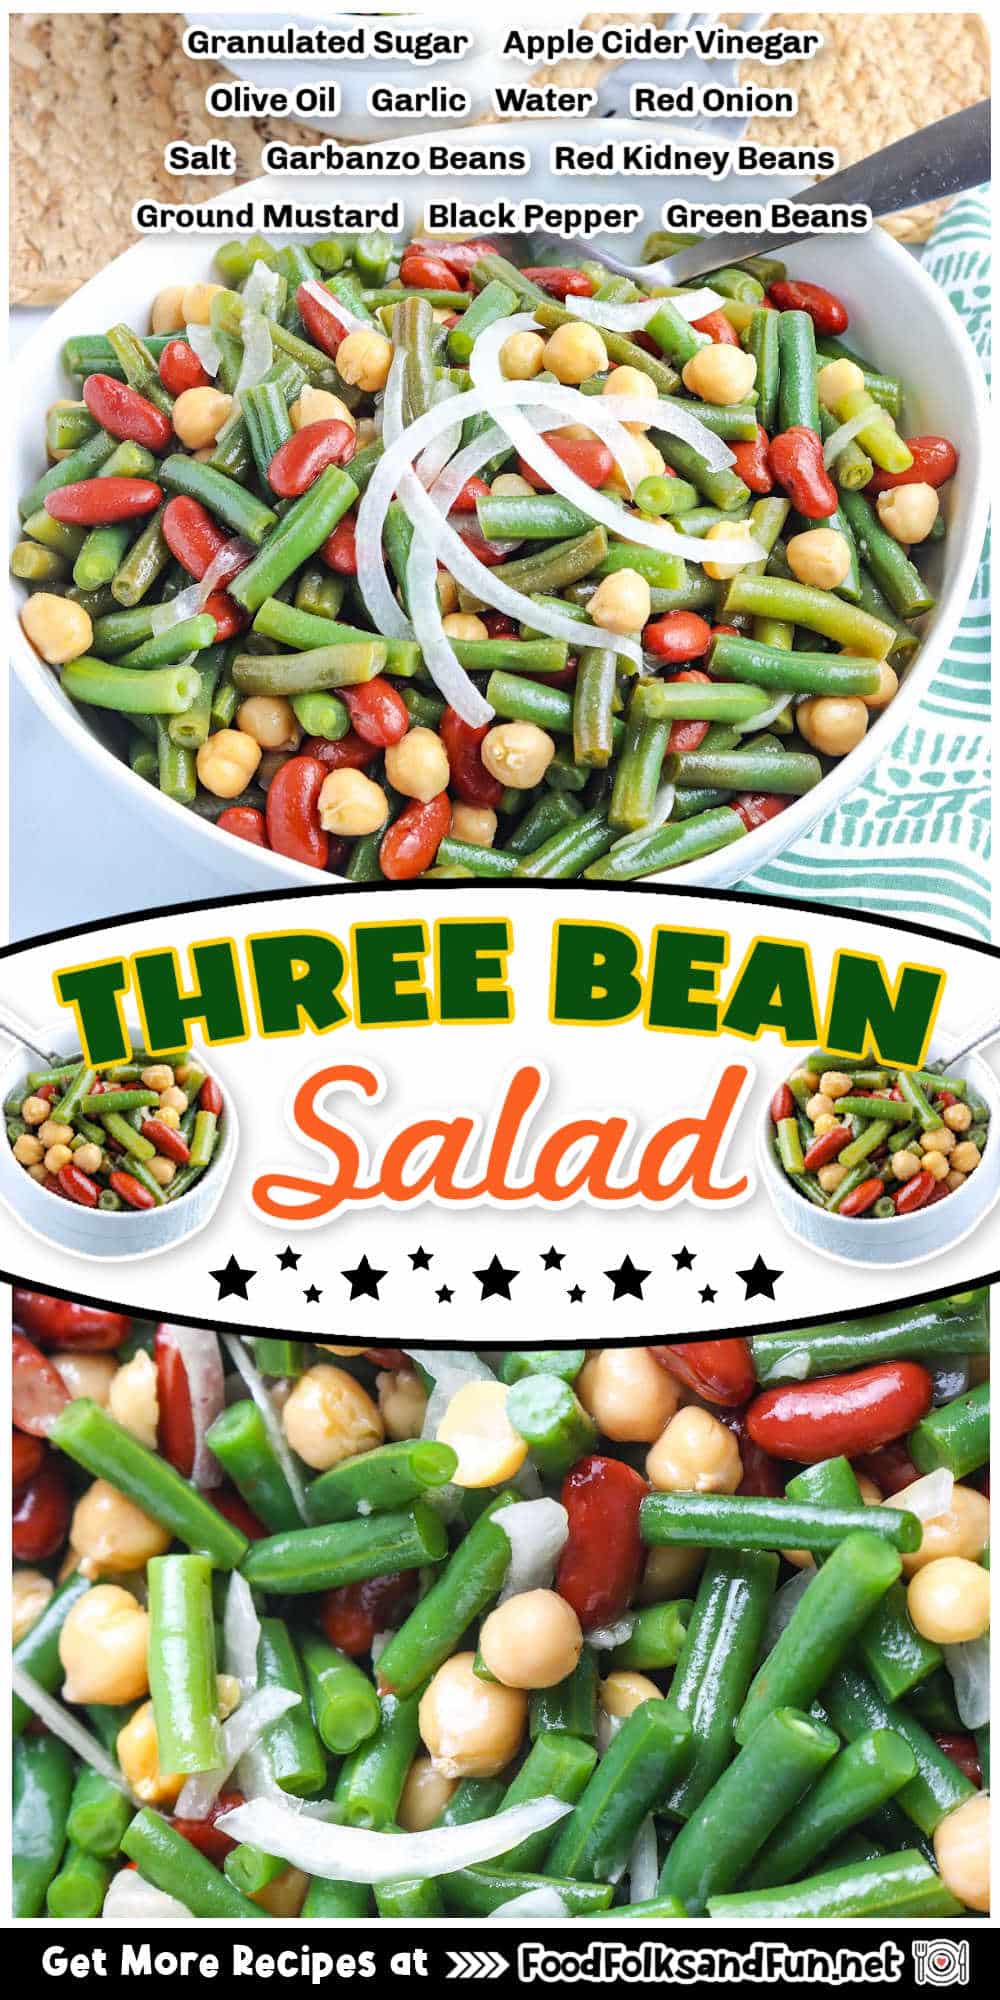 This sweet, savory, and tangy Old Fashioned Three Bean Salad makes a great addition to any meal. It’s quick and easy to make but still full of flavor. via @foodfolksandfun